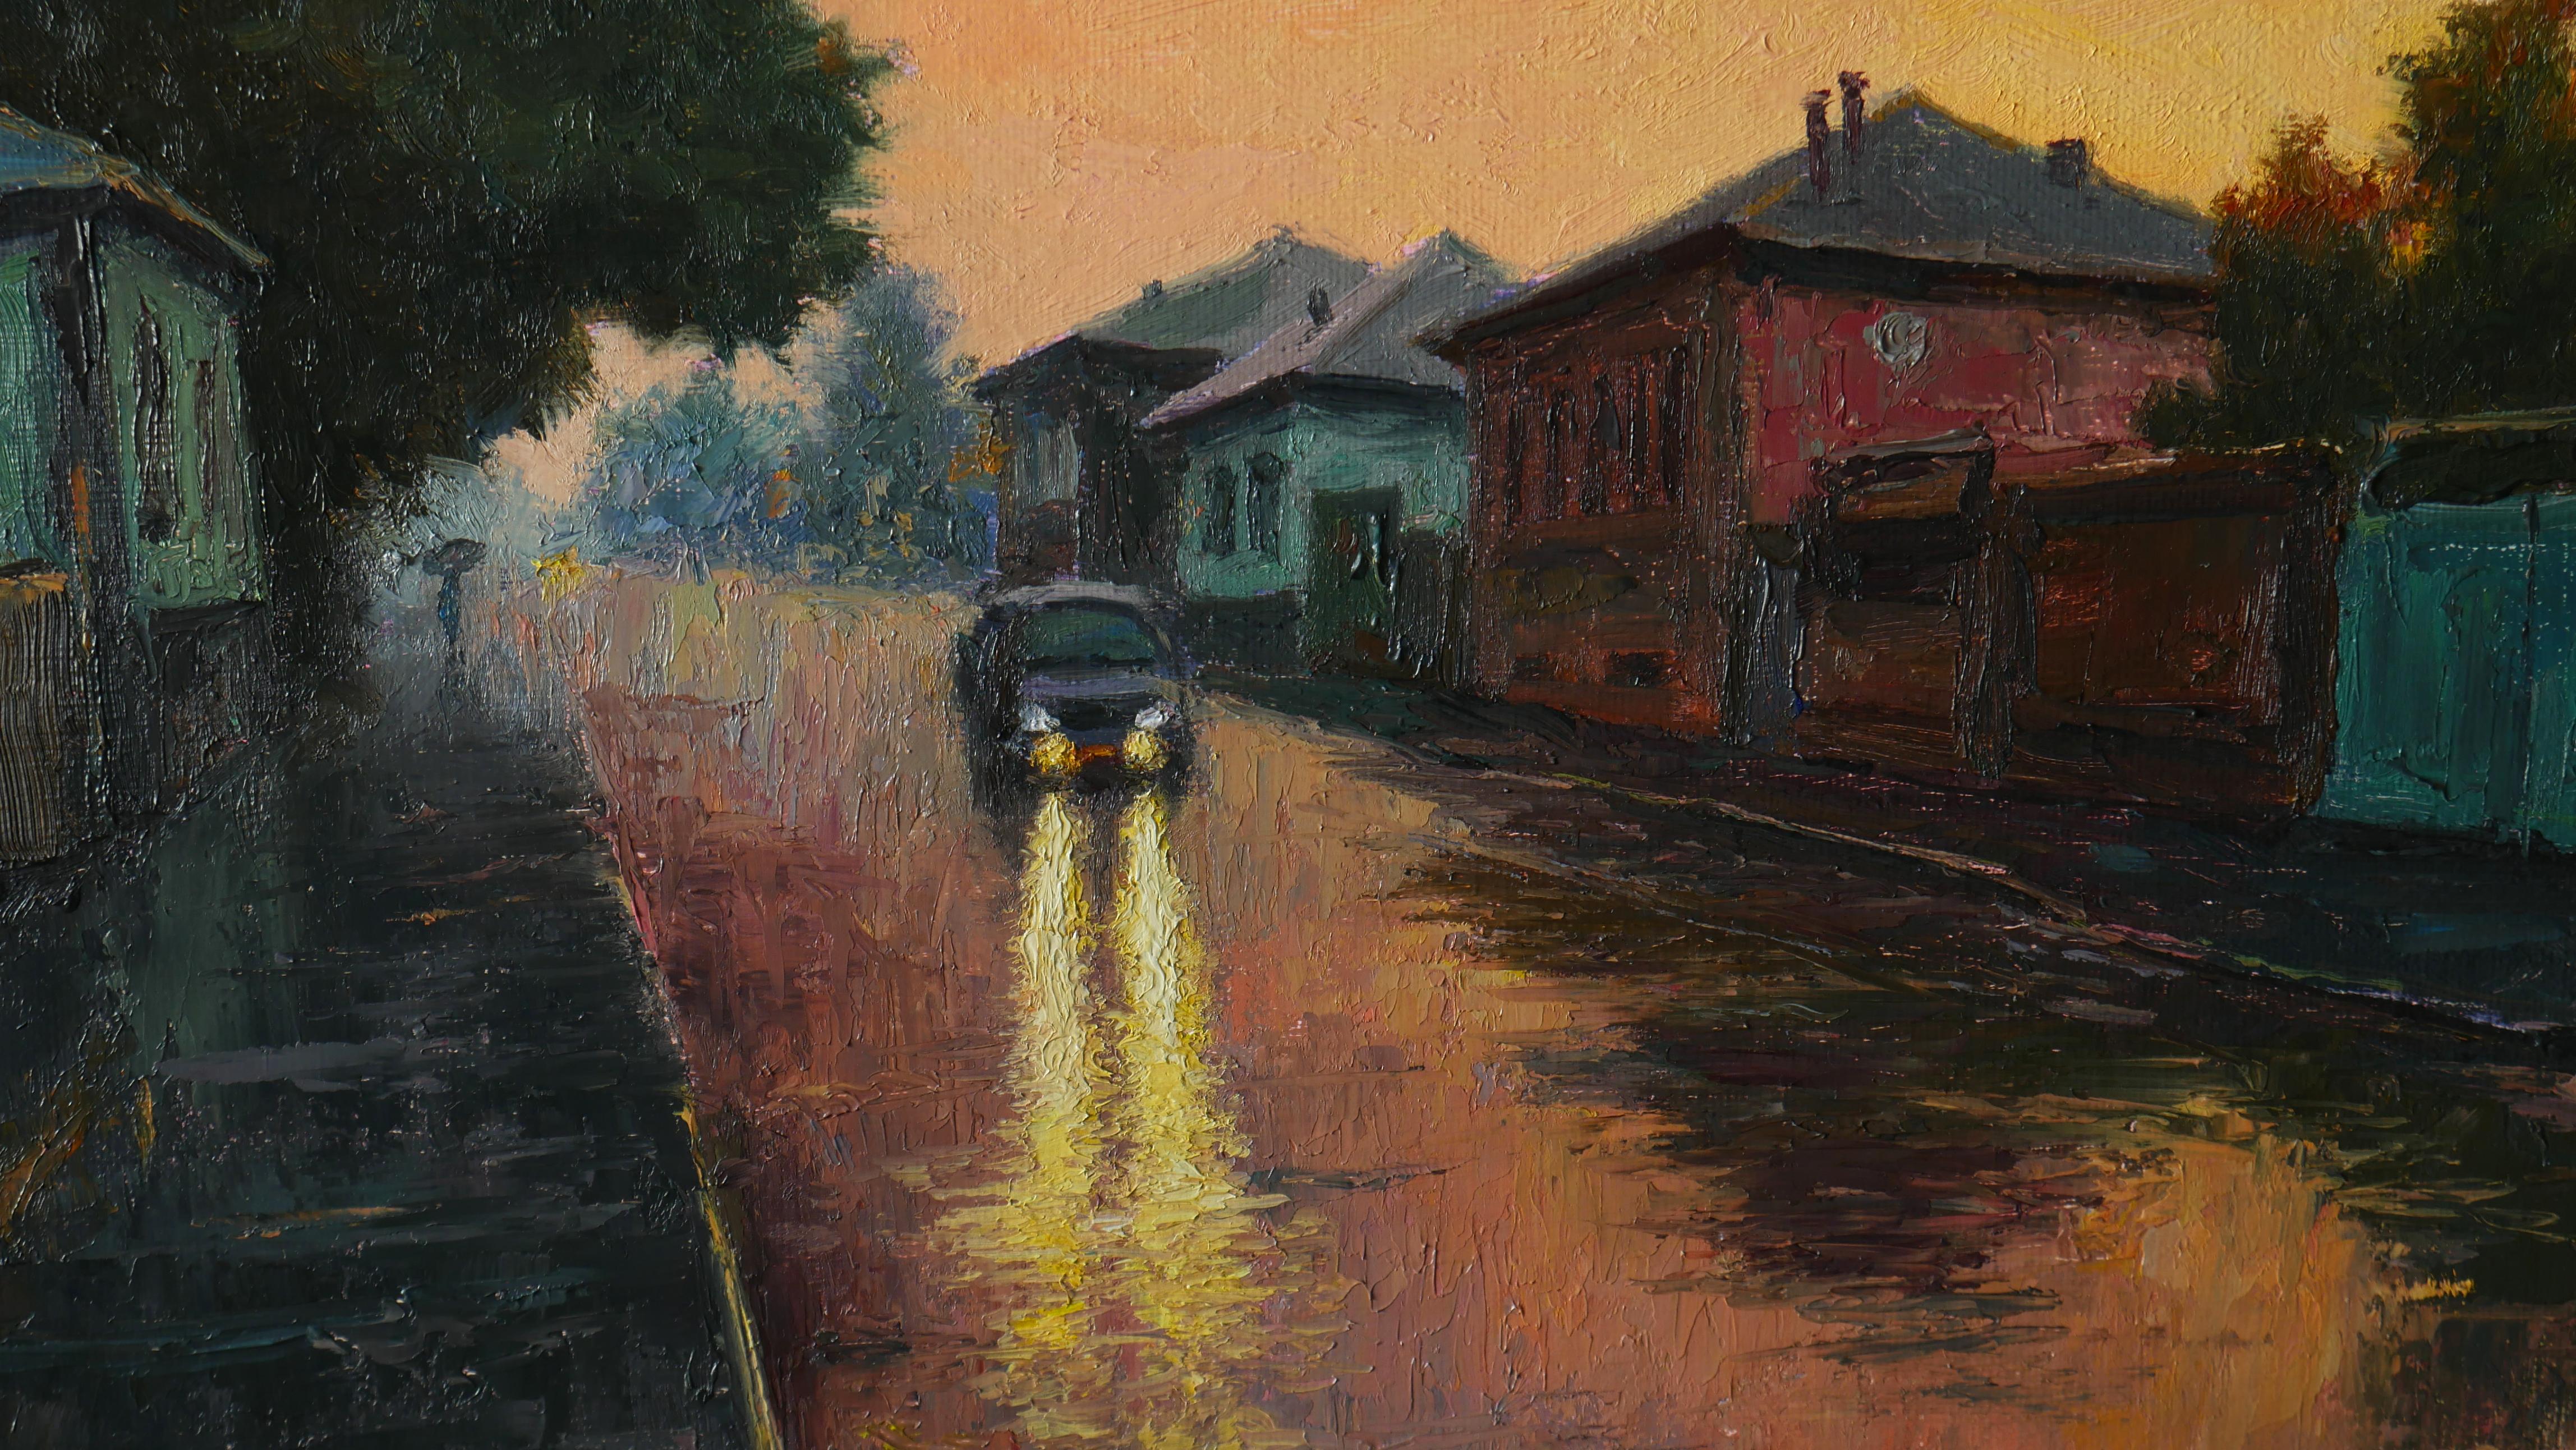 An evening cityscape with a beautiful sky and rain creates an immersive effect. The painting evokes a sense of peace. Many of those who purchased Nikolai's paintings noted his masterful and sensual capture of the mood and state of the depicted